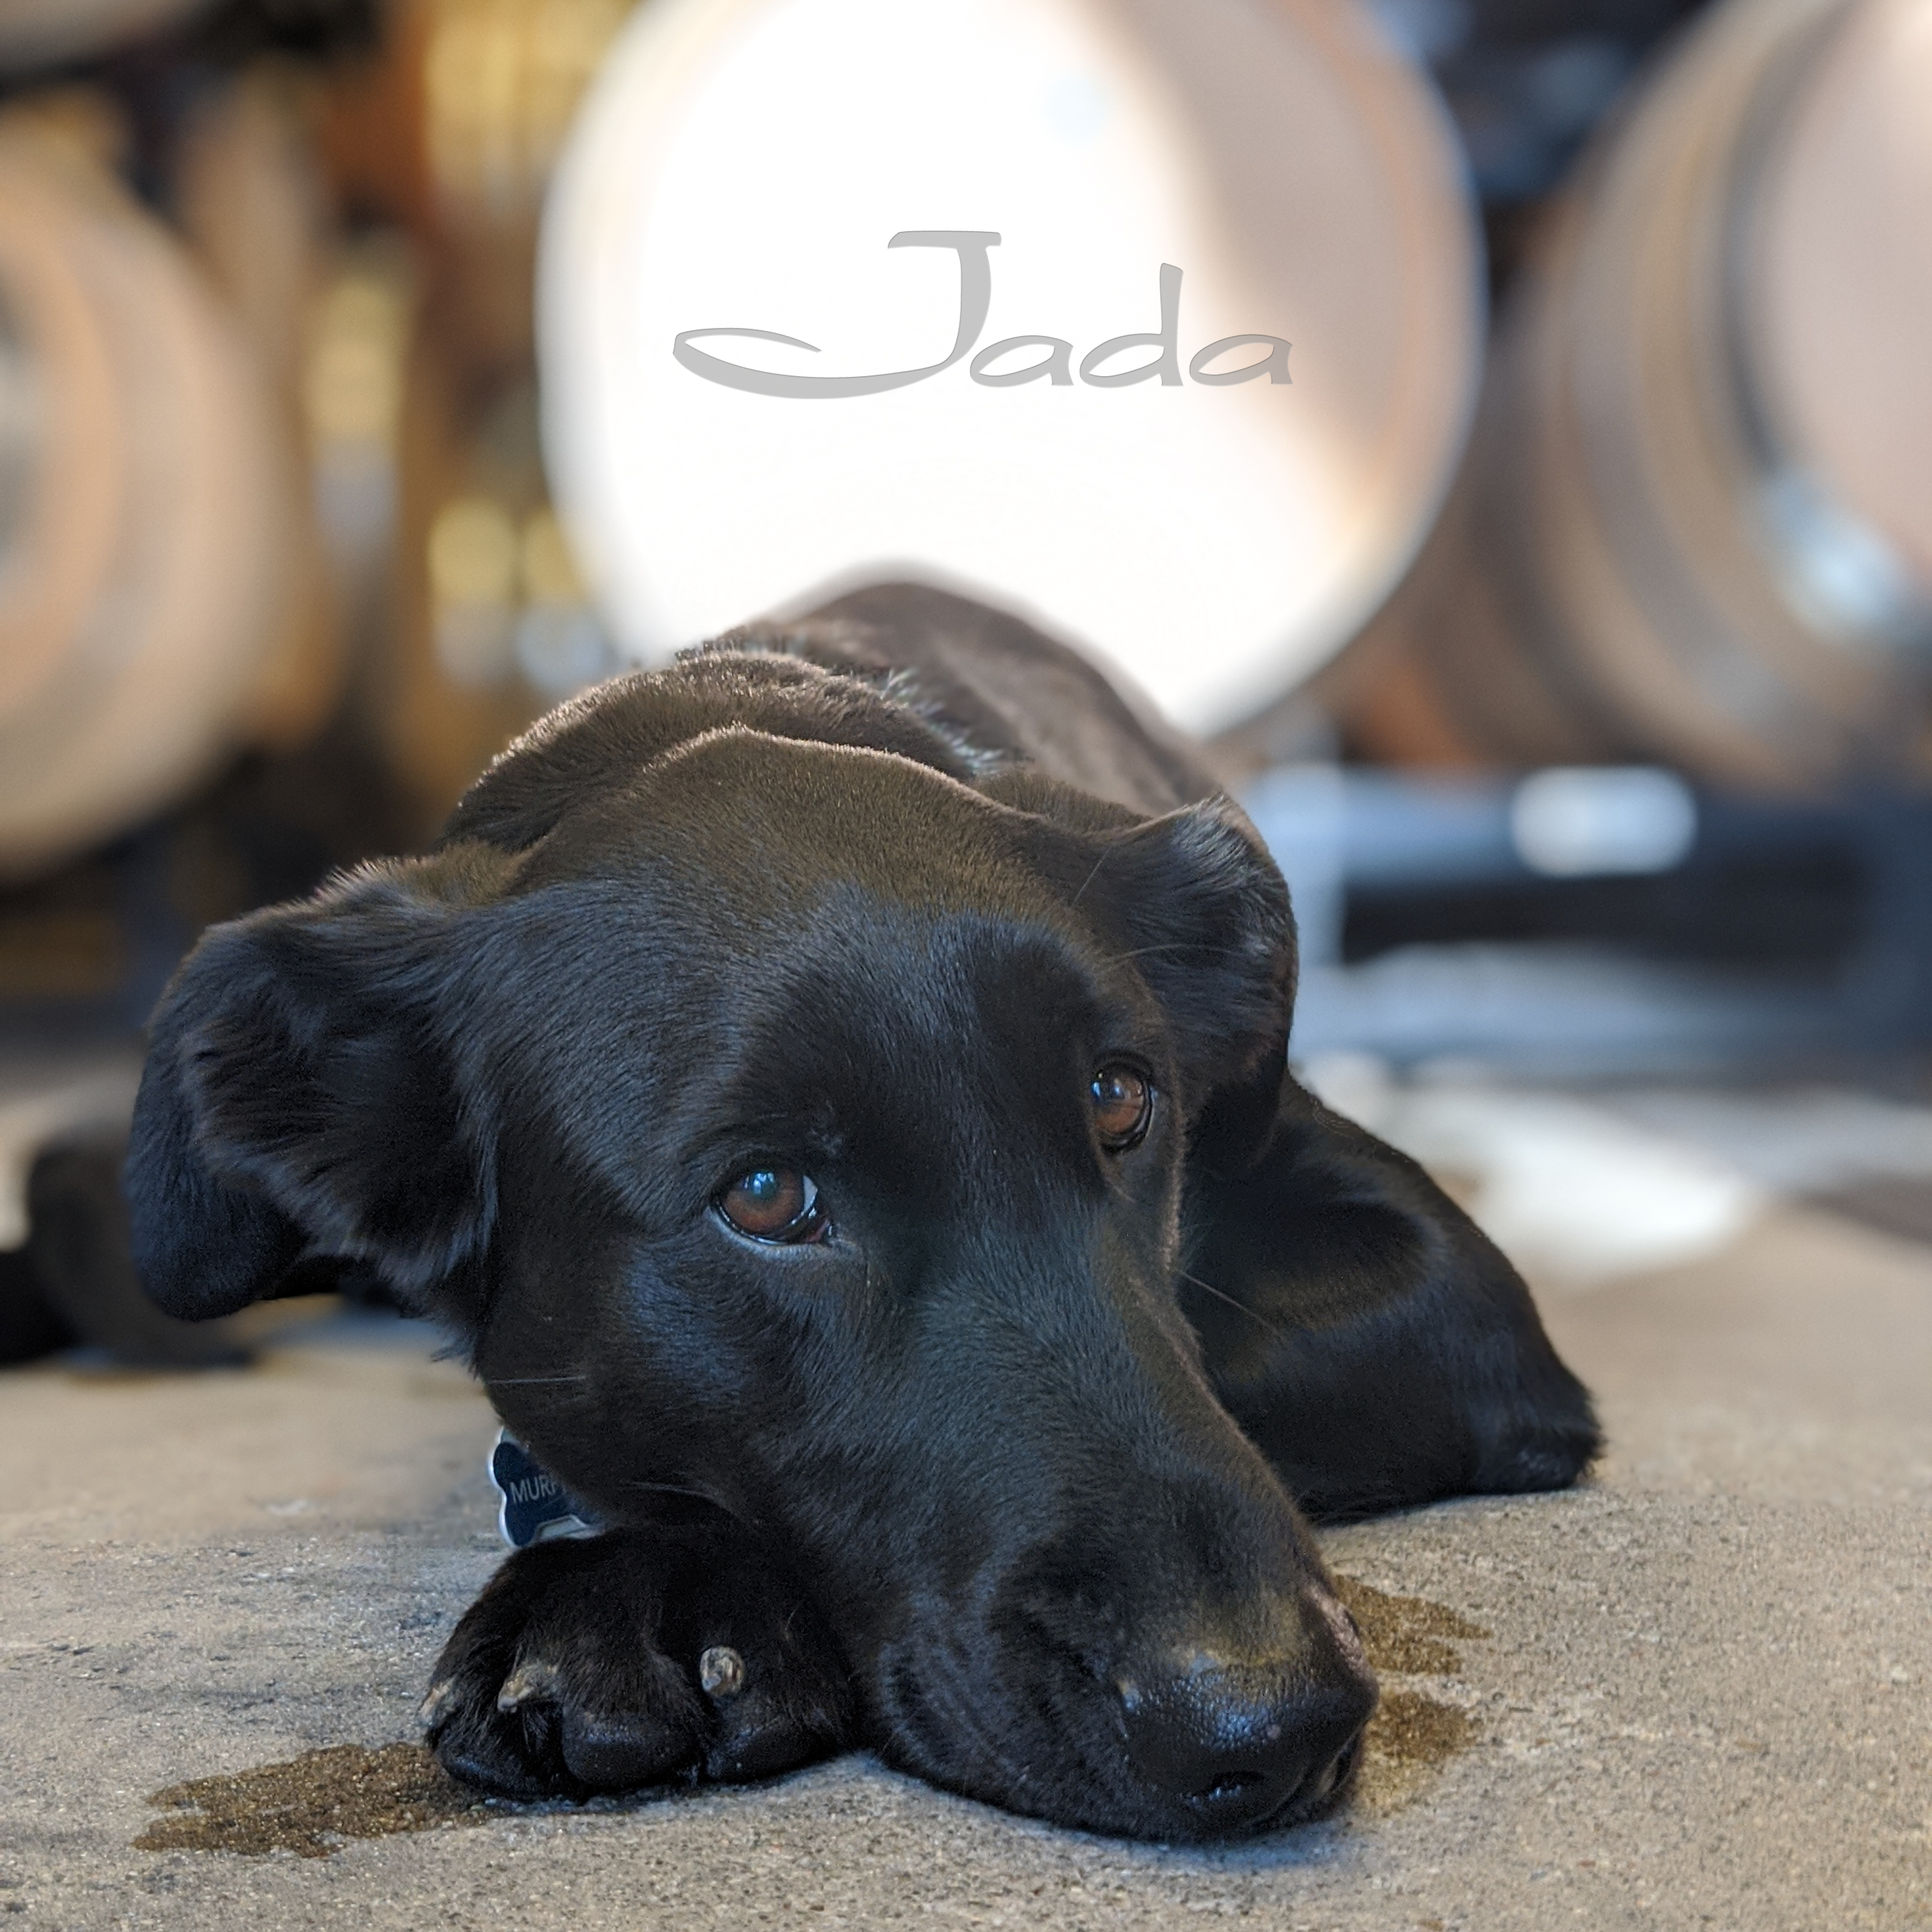 April 20th-21st | Bring your animal companion to Jada for Wine 4 Paws Weekend.